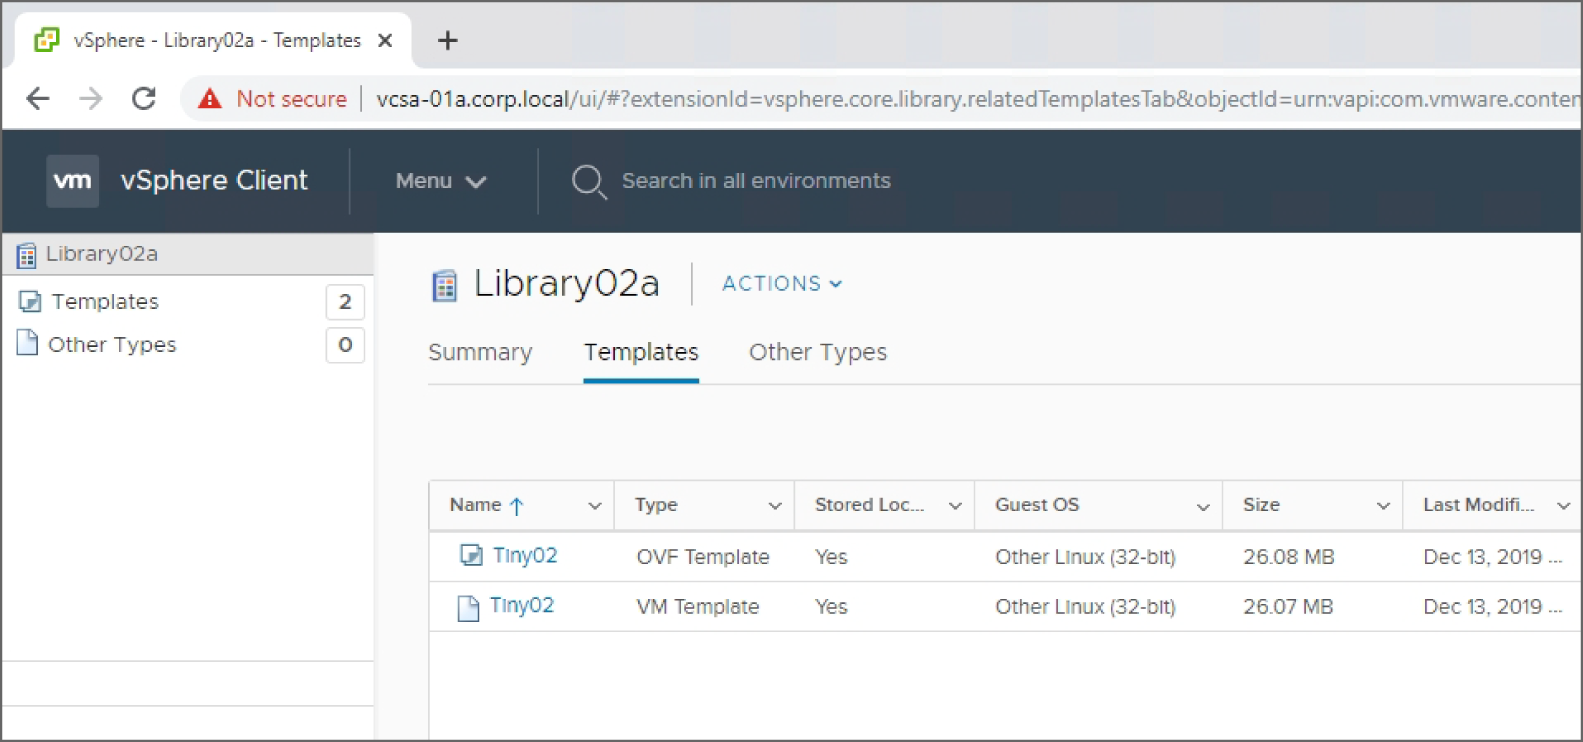 Snapshot of the content library showing a virtual machine which has uploaded as a VM template and OVF.